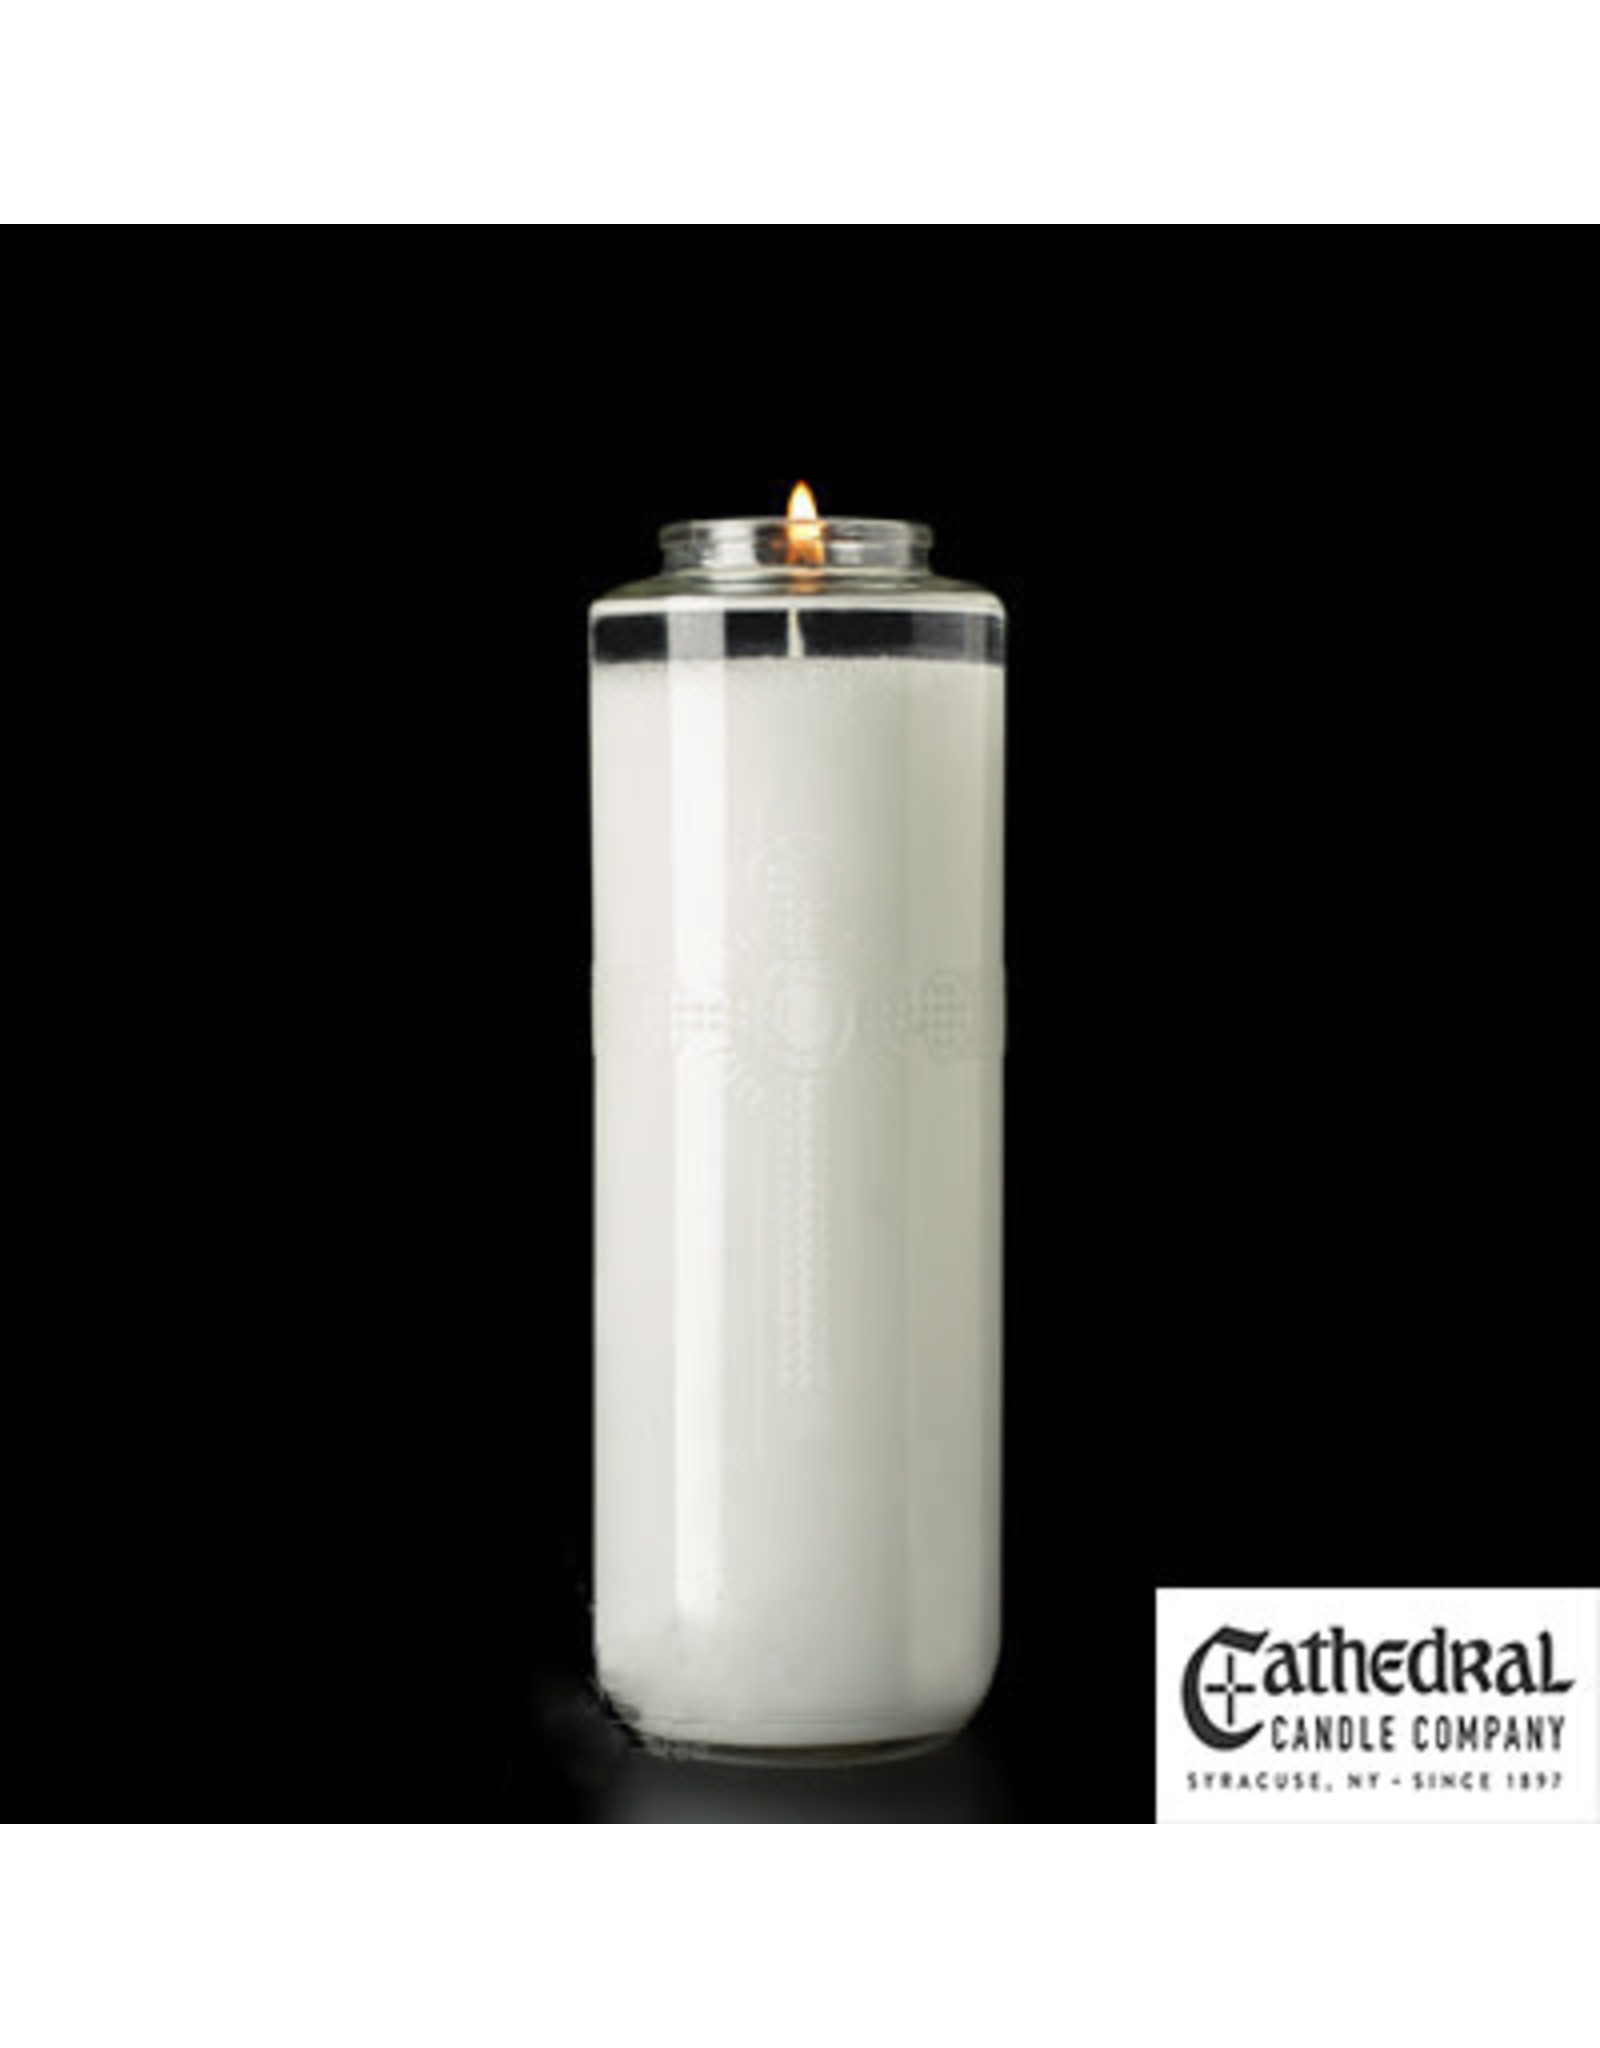 Cathedral Candle 8-Day "Sacralite" Glass Candle (Each)